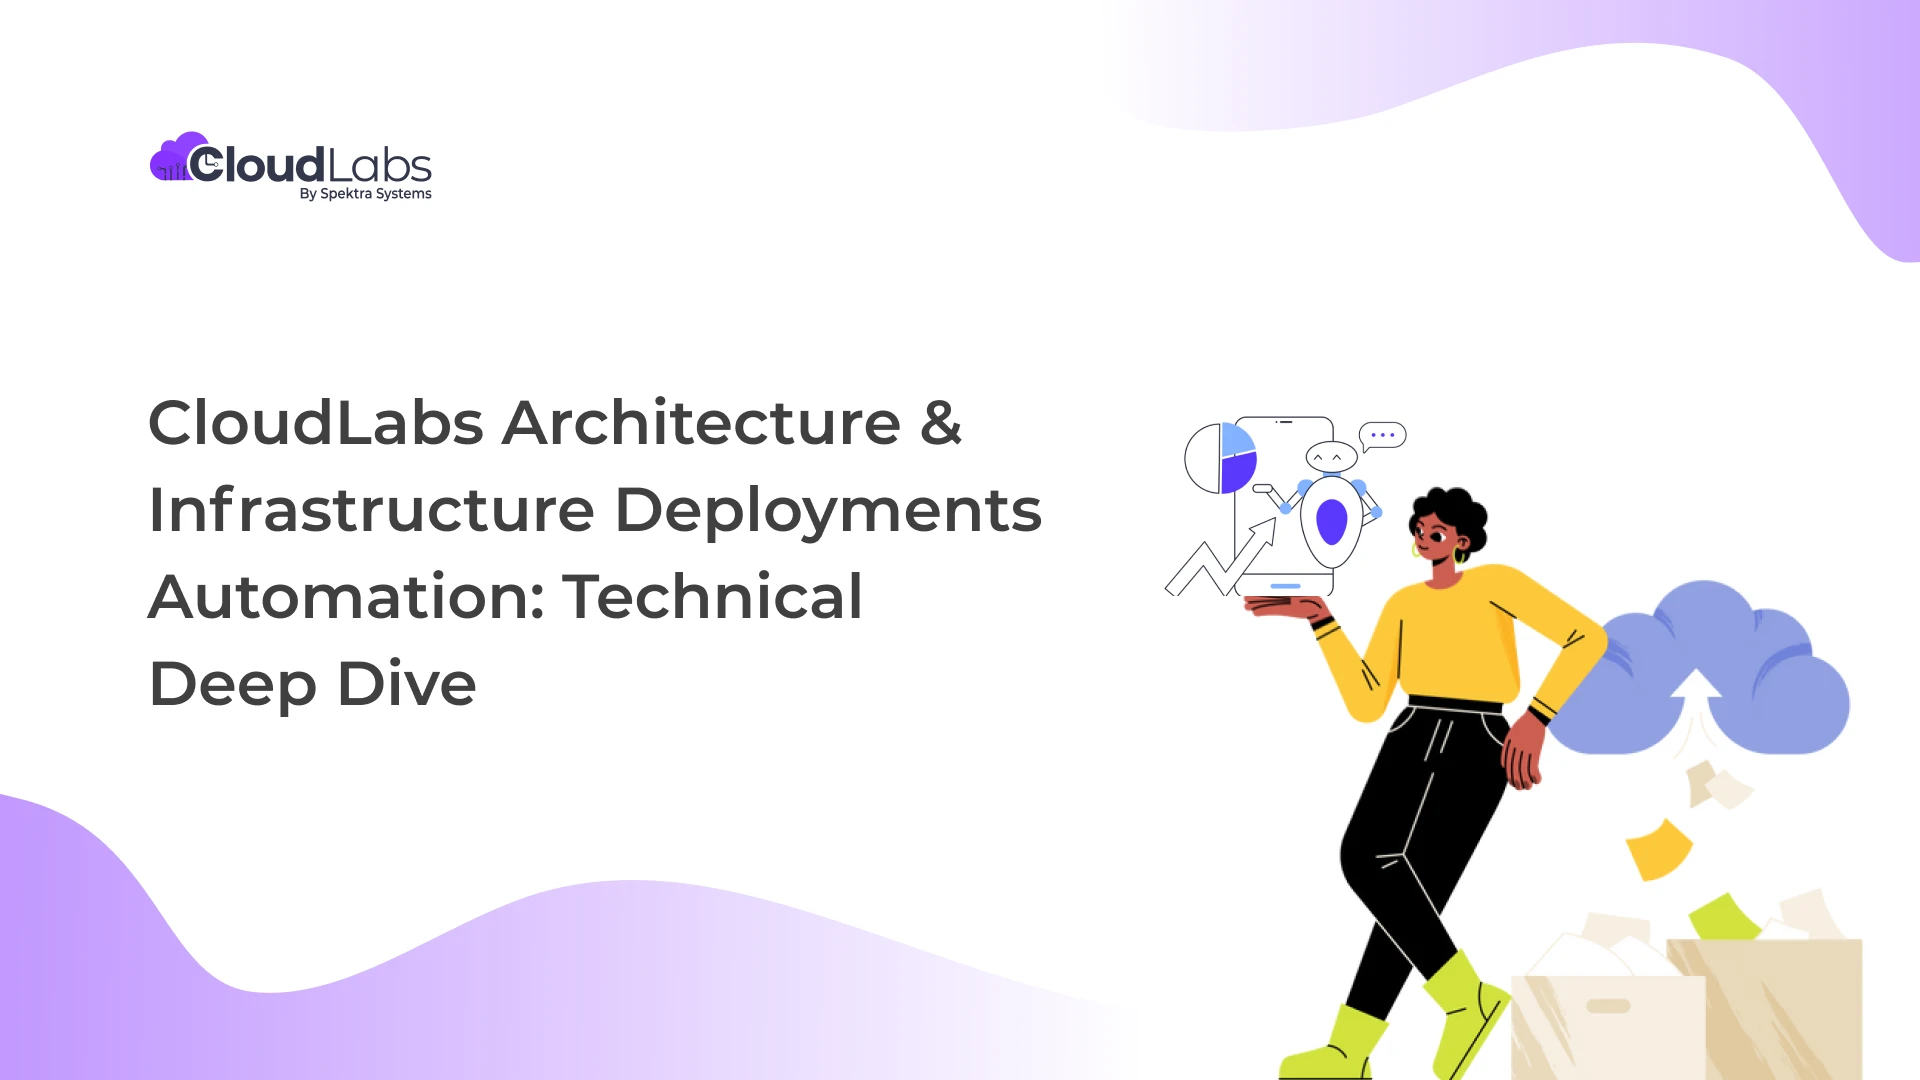 CloudLabs Architecture & Infrastructure Deployments Automation: Technical Deep Dive